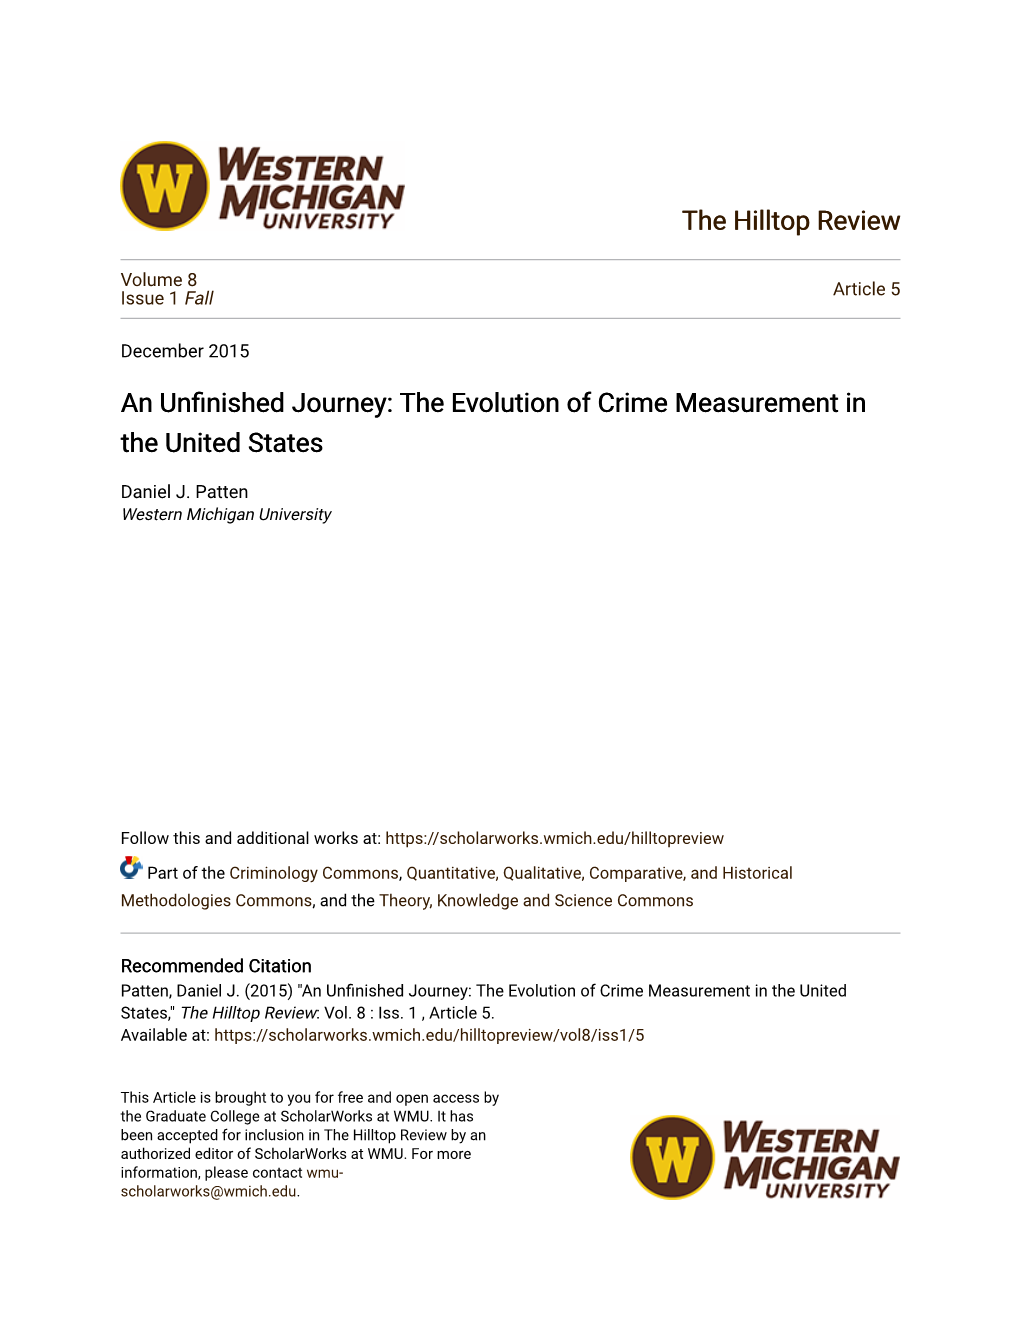 An Unfinished Journey: the Evolution of Crime Measurement in the United States